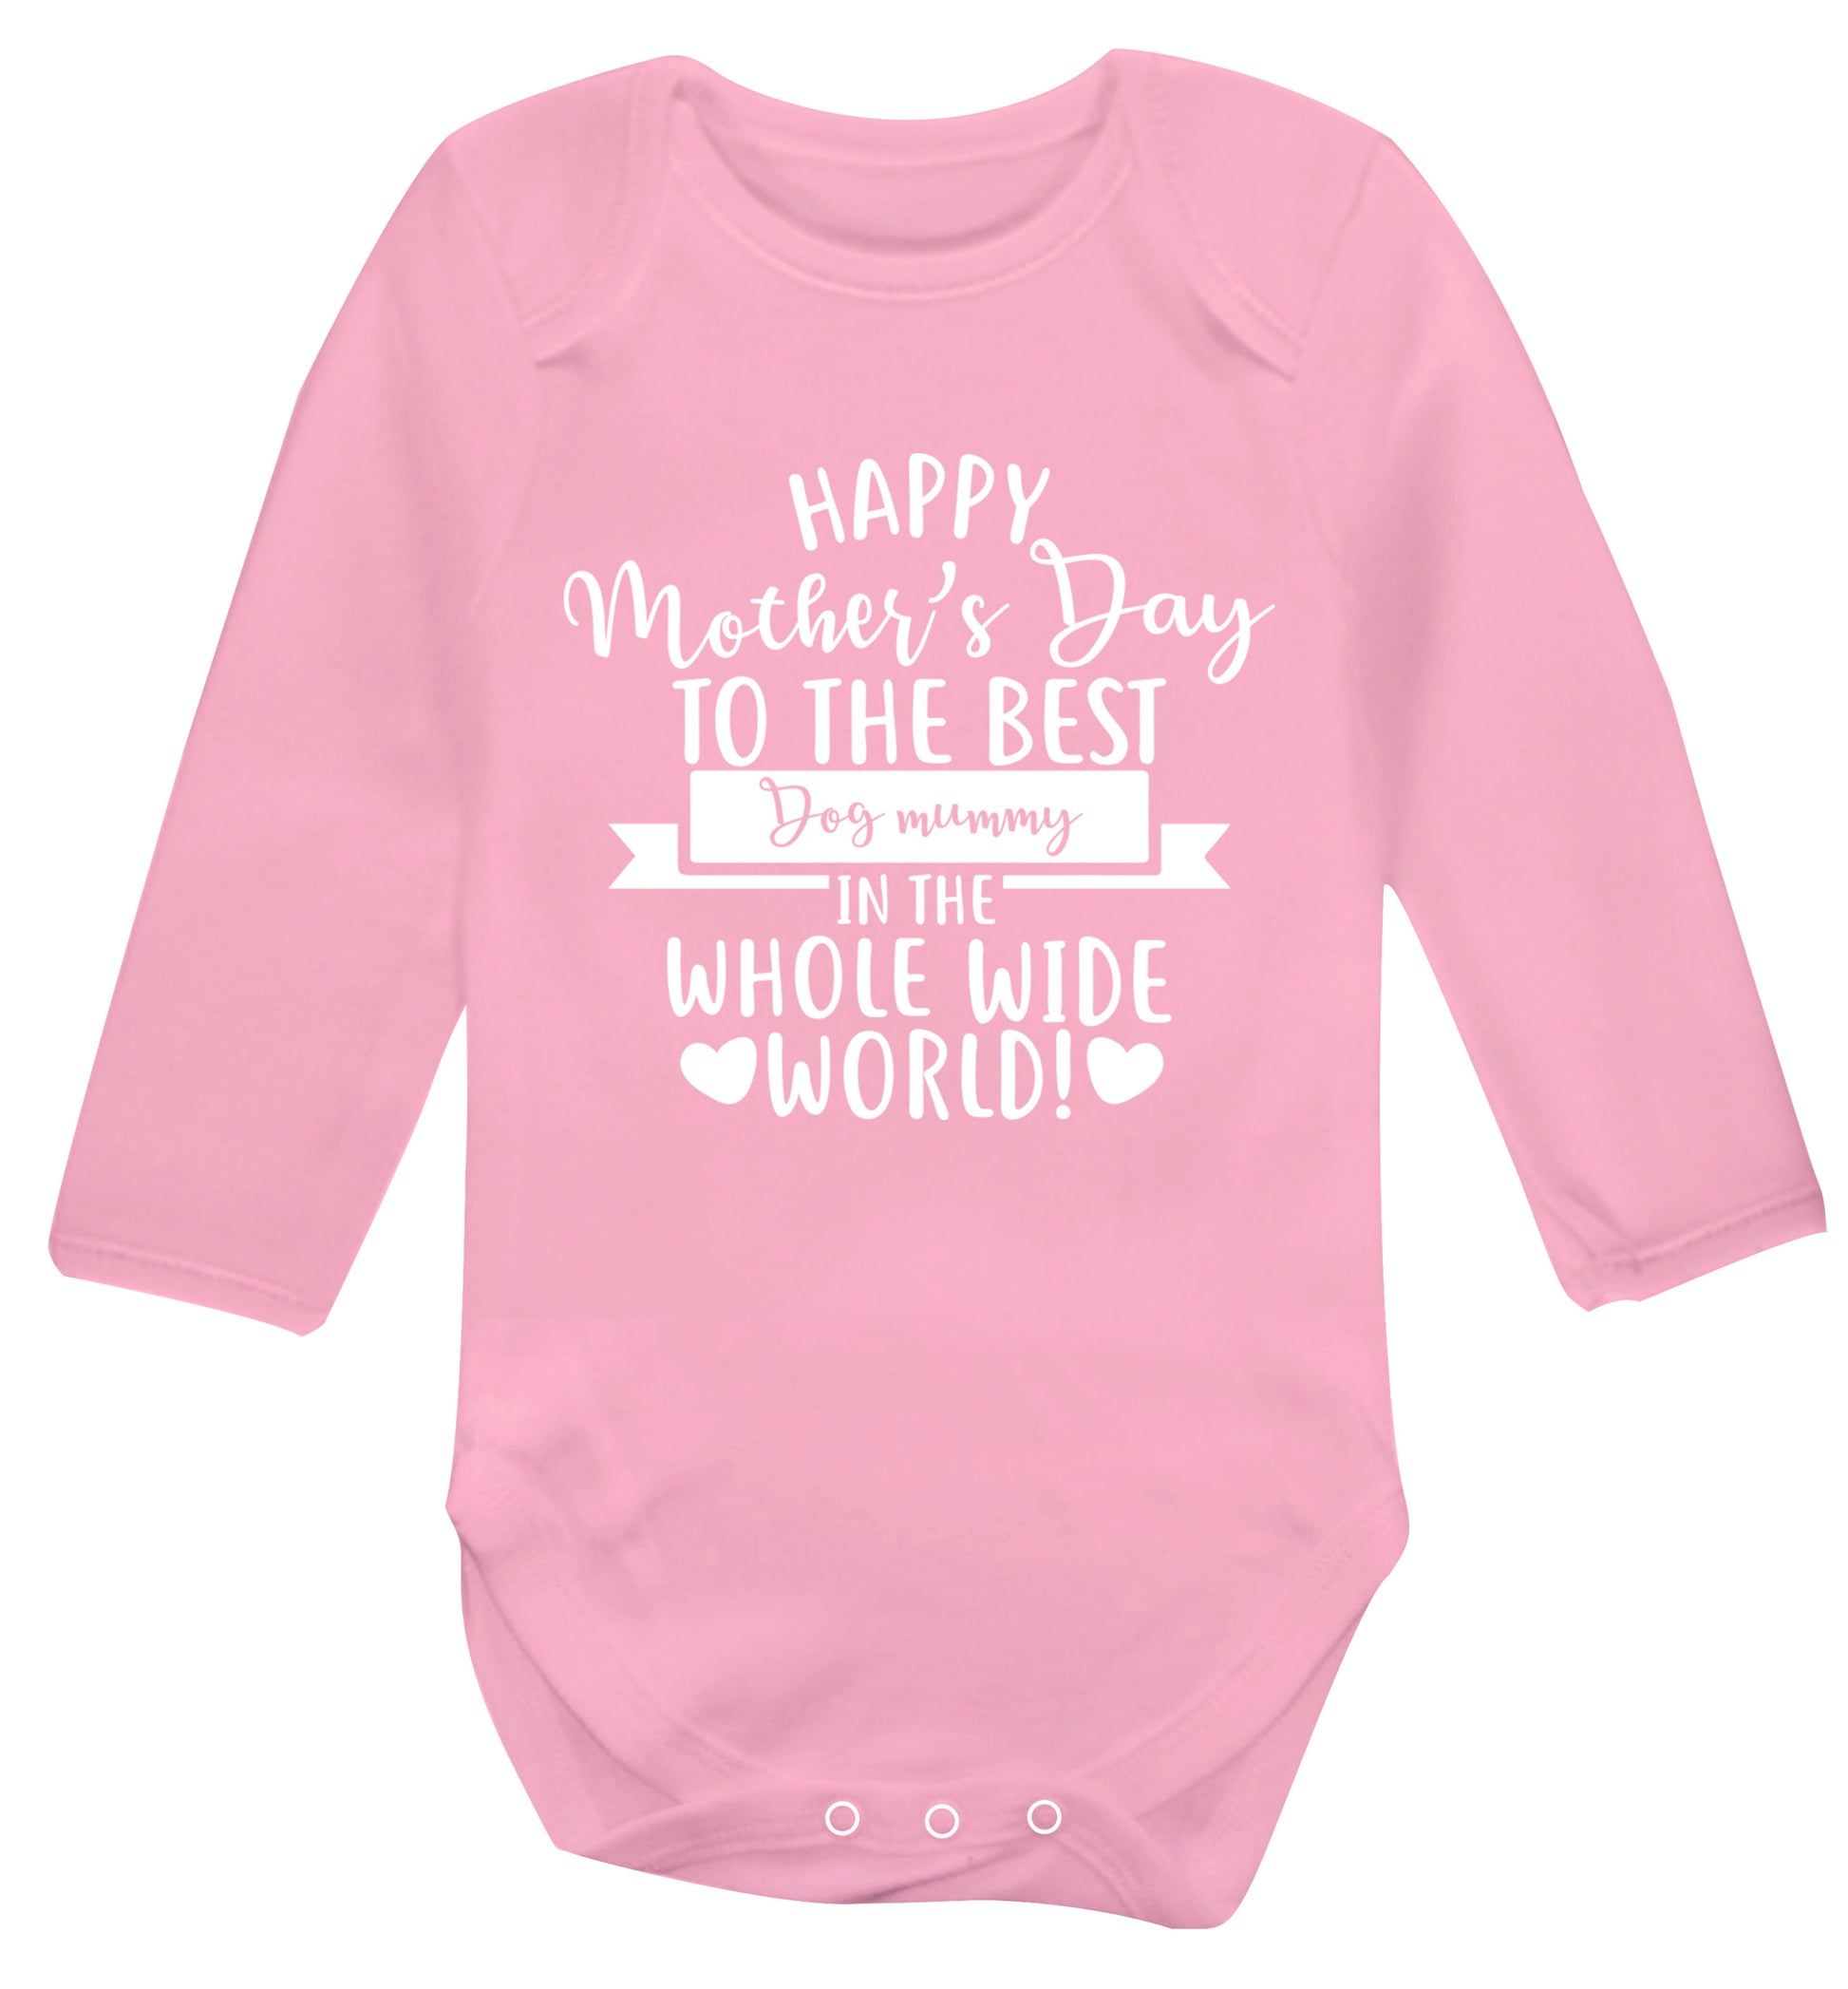 Happy mother's day to the best dog mummy in the world Baby Vest long sleeved pale pink 6-12 months